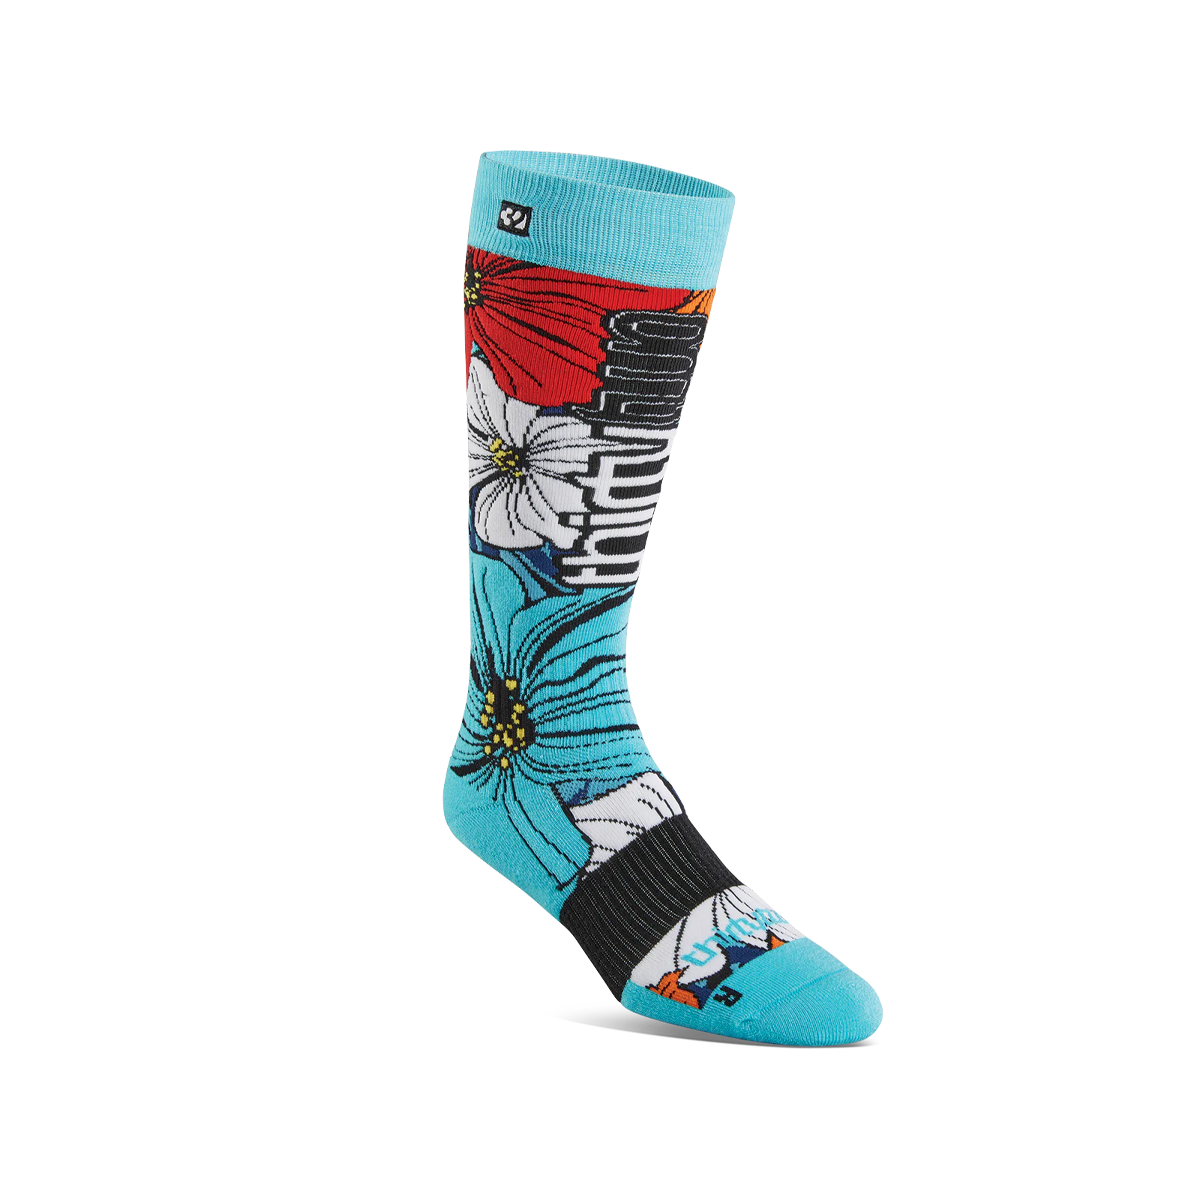 ThirtyTwo Women's Double Sock - Floral